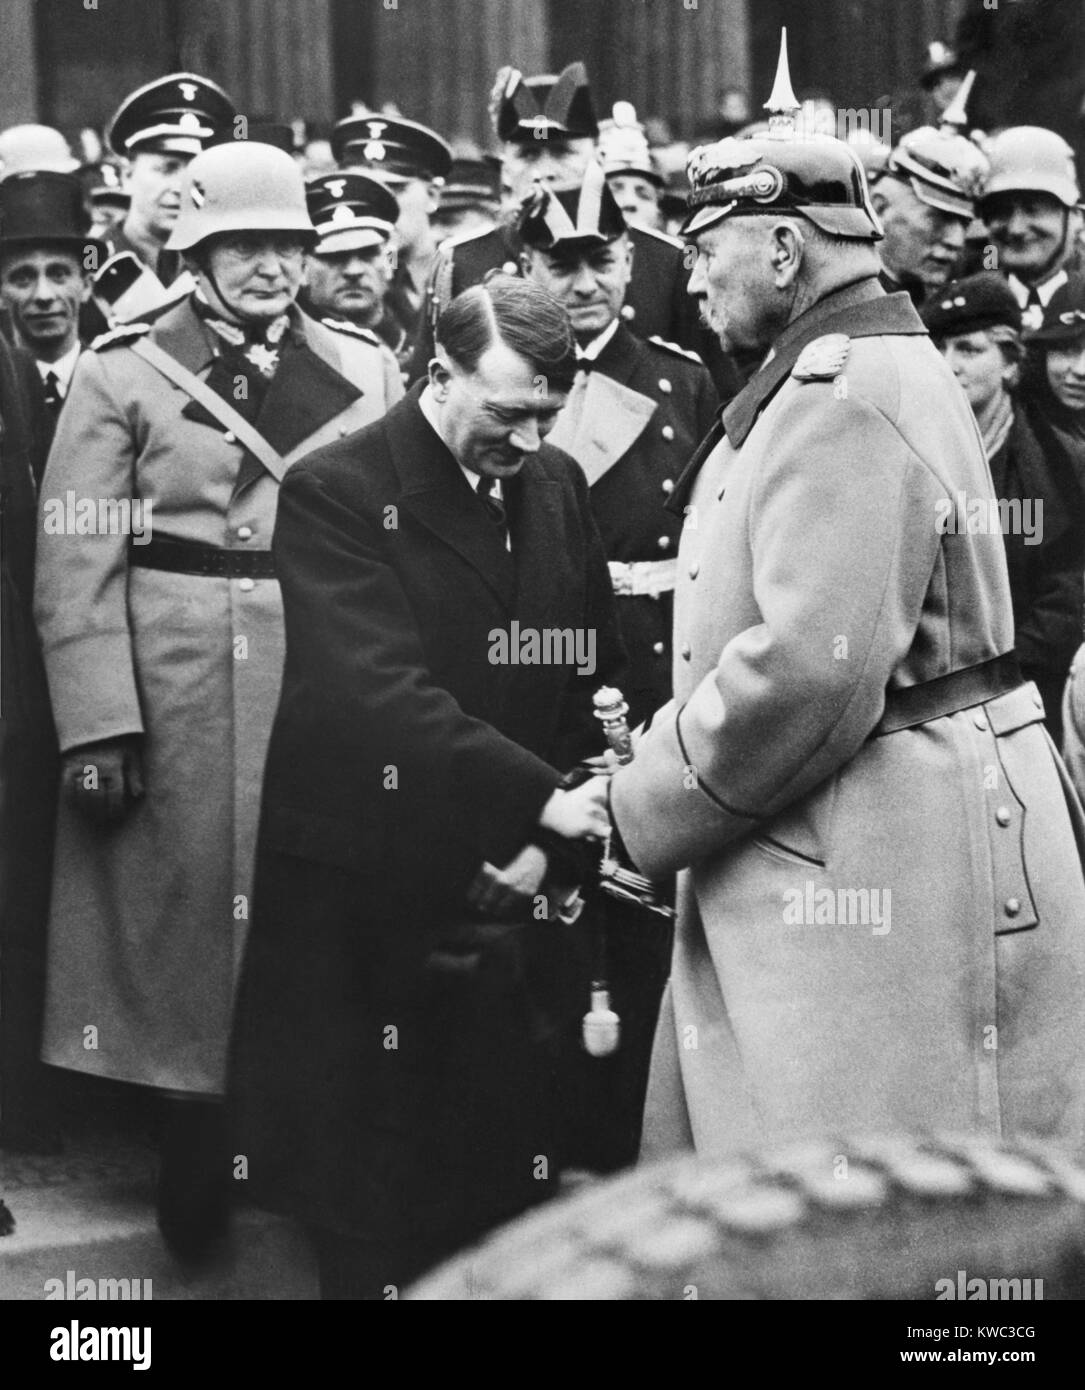 Newly appointed Chancellor Adolf Hitler greets President von Hindenburg at a memorial service. Berlin, 1933. Behind Hitler is Herman Goering and Joseph Goebbels. (BSLOC 2015 13 44) Stock Photo